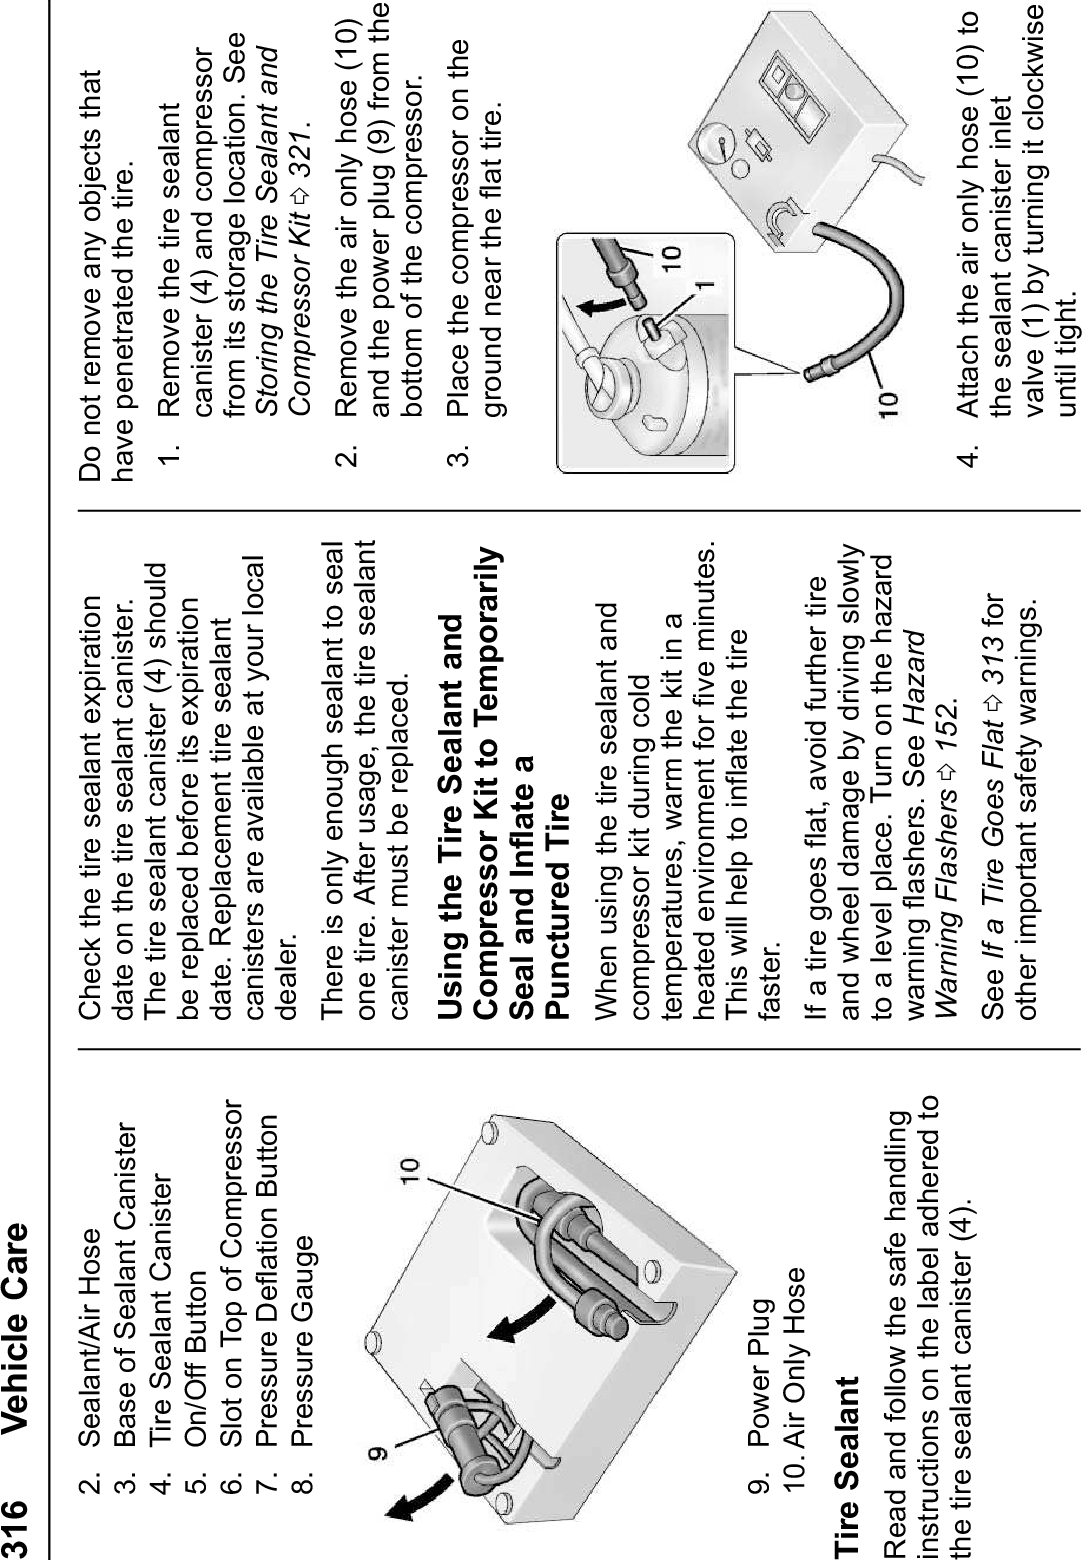 316 Vehicle Care2. Sealant/Air Hose3. Base of Sealant Canister4. Tire Sealant Canister5. On/Off Button6. Slot on Top of Compressor7. Pressure Deflation Button8. Pressure Gauge9. Power Plug10. Air Only HoseTire SealantRead and follow the safe handlinginstructions on the label adhered tothe tire sealant canister (4).Check the tire sealant expirationdate on the tire sealant canister.The tire sealant canister (4) shouldbe replaced before its expirationdate. Replacement tire sealantcanisters are available at your localdealer.There is only enough sealant to sealone tire. After usage, the tire sealantcanister must be replaced.Using the Tire Sealant andCompressor Kit to TemporarilySeal and Inflate aPunctured TireWhen using the tire sealant andcompressor kit during coldtemperatures, warm the kit in aheated environment for five minutes.This will help to inflate the tirefaster.If a tire goes flat, avoid further tireand wheel damage by driving slowlyto a level place. Turn on the hazardwarning flashers. See HazardWarning Flashers 0152.See If a Tire Goes Flat 0313 forother important safety warnings.Do not remove any objects thathave penetrated the tire.1. Remove the tire sealantcanister (4) and compressorfrom its storage location. SeeStoring the Tire Sealant andCompressor Kit 0321.2. Remove the air only hose (10)and the power plug (9) from thebottom of the compressor.3. Place the compressor on theground near the flat tire.4. Attach the air only hose (10) tothe sealant canister inletvalve (1) by turning it clockwiseuntil tight.